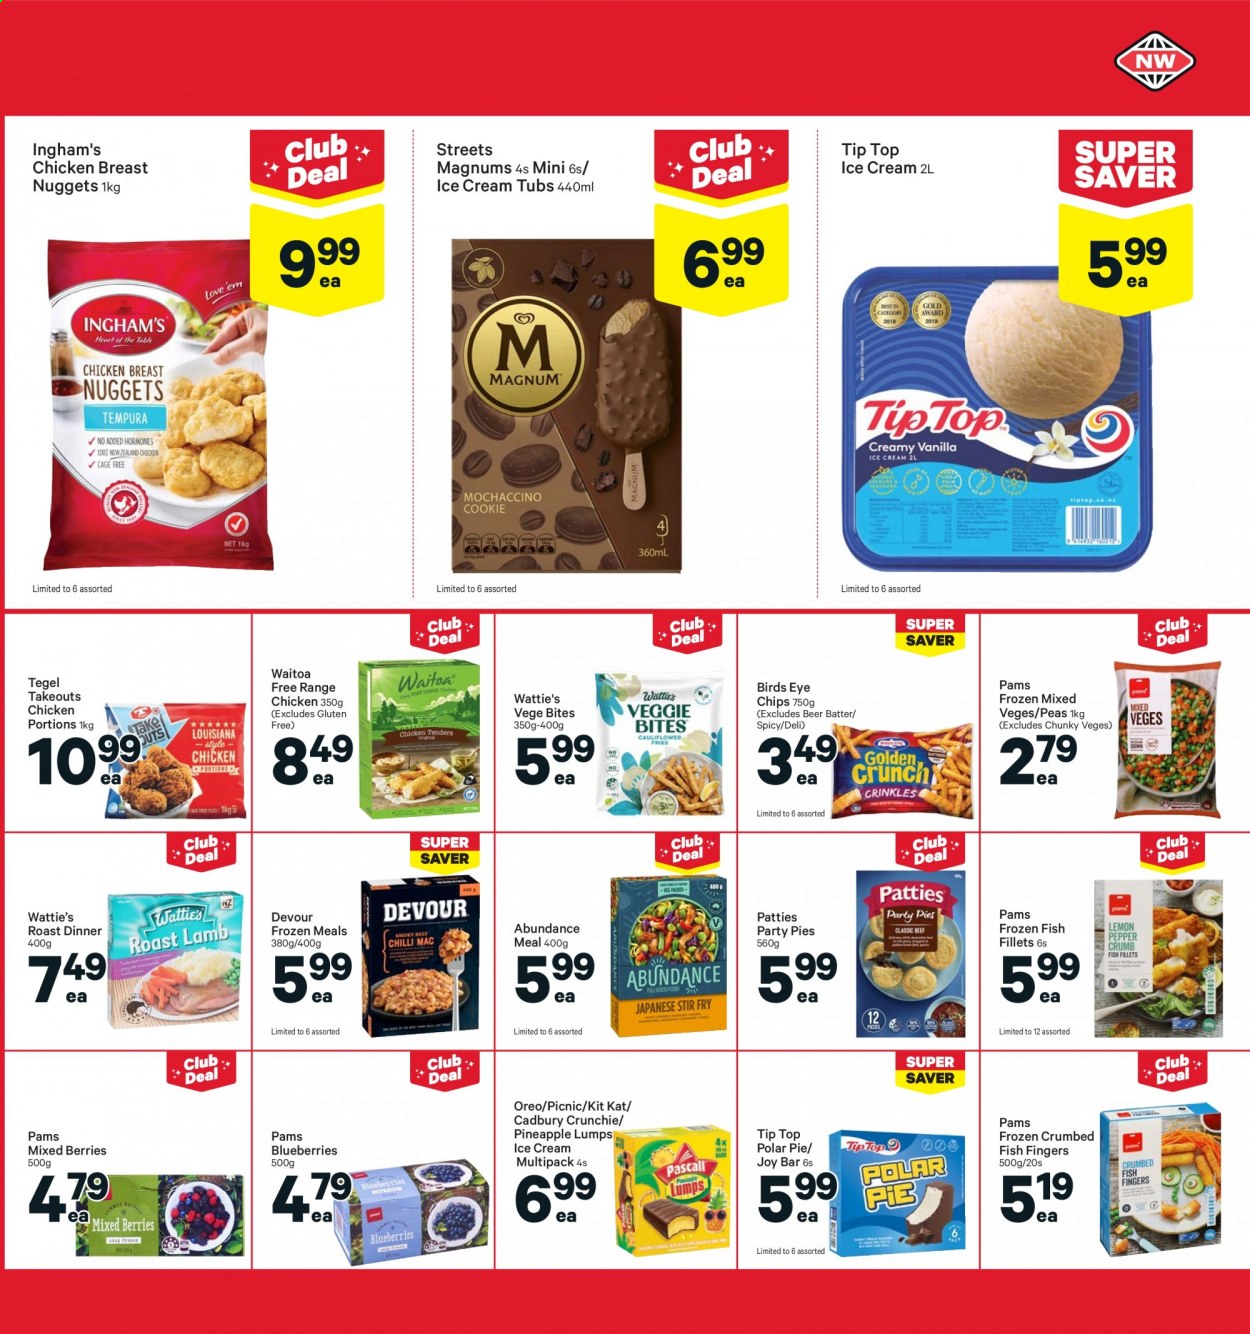 thumbnail - New World mailer - 02.08.2021 - 08.08.2021 - Sales products - pie, Tip Top, peas, blueberries, pineapple, fish fillets, fish, crumbed fish, fish fingers, fish sticks, nuggets, chicken nuggets, Bird's Eye, Wattie's, Oreo, ice cream, Joy Bar, Devour, KitKat, Cadbury, beer. Page 23.